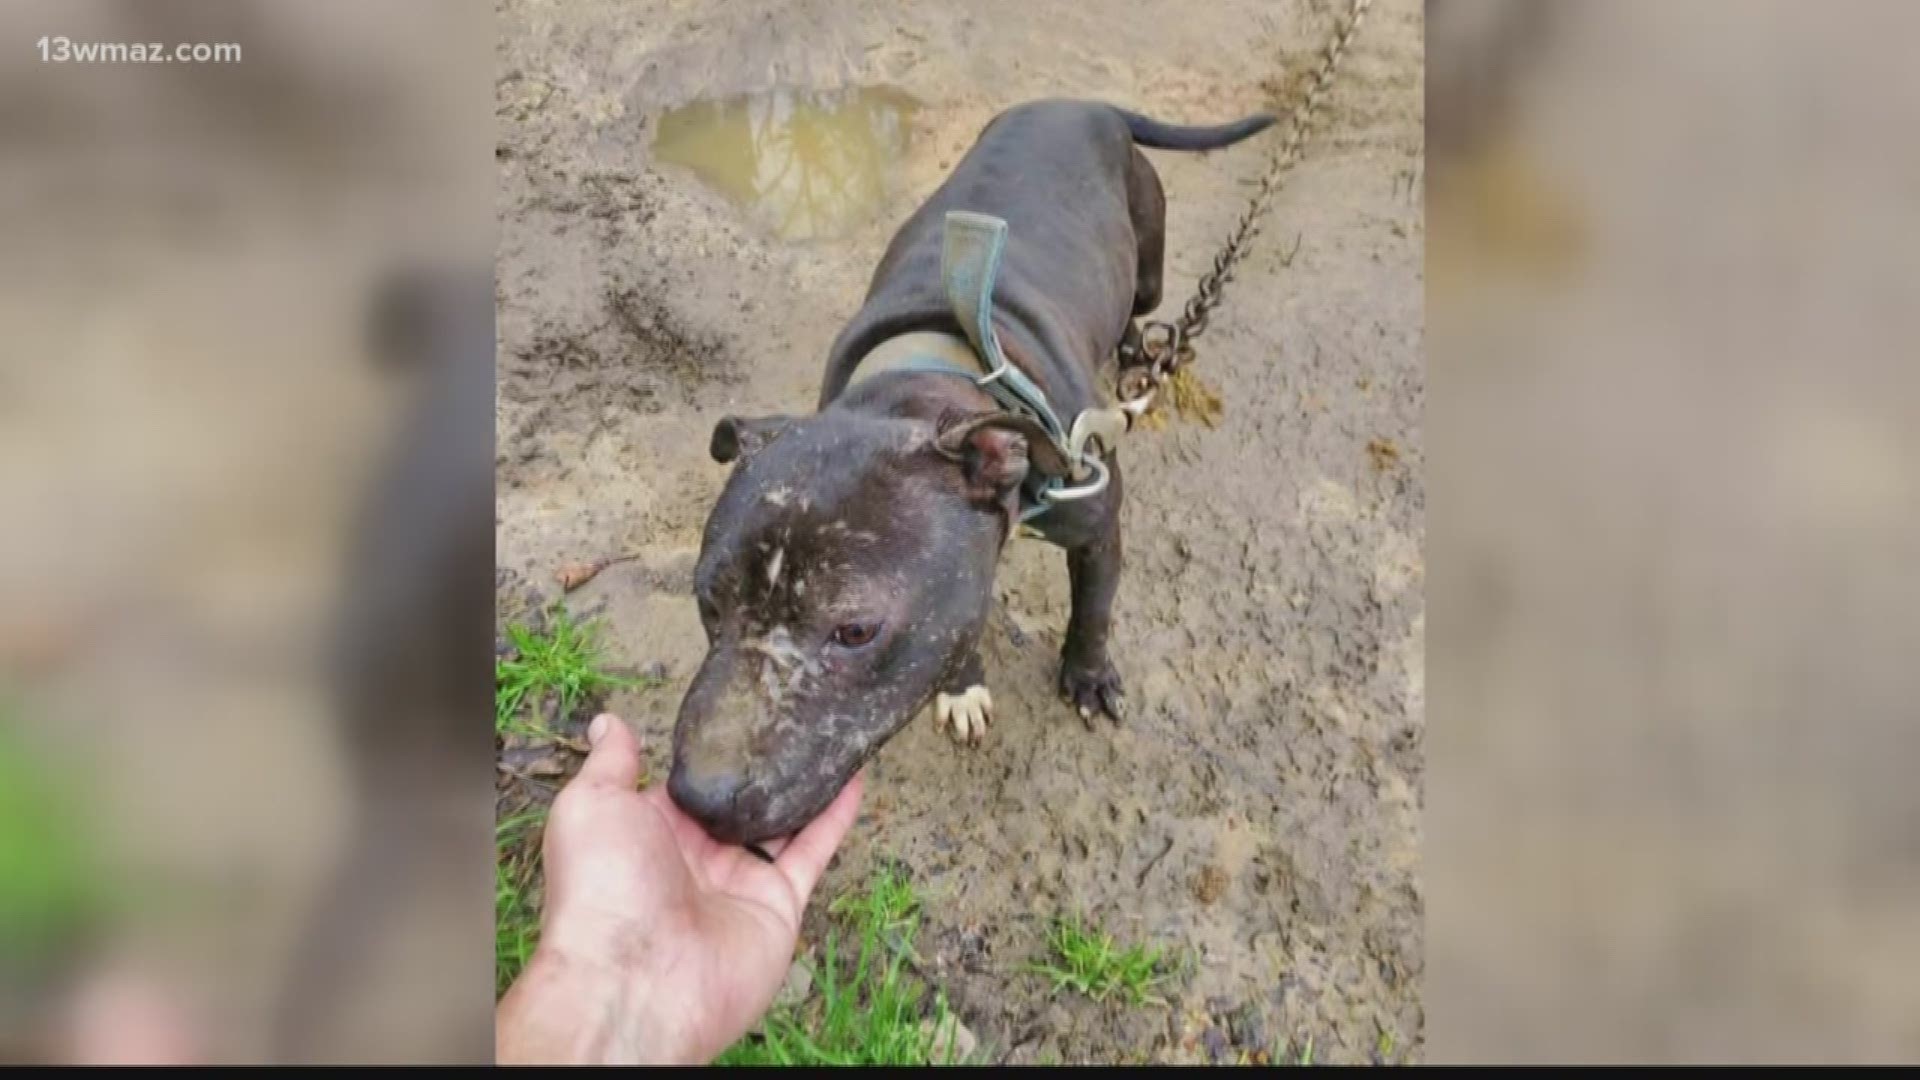 US Marshals rescued more than 160 dogs from an alleged dogfighting ring with ties to Central Georgia. Many called wondering if your lost dog was one of them.